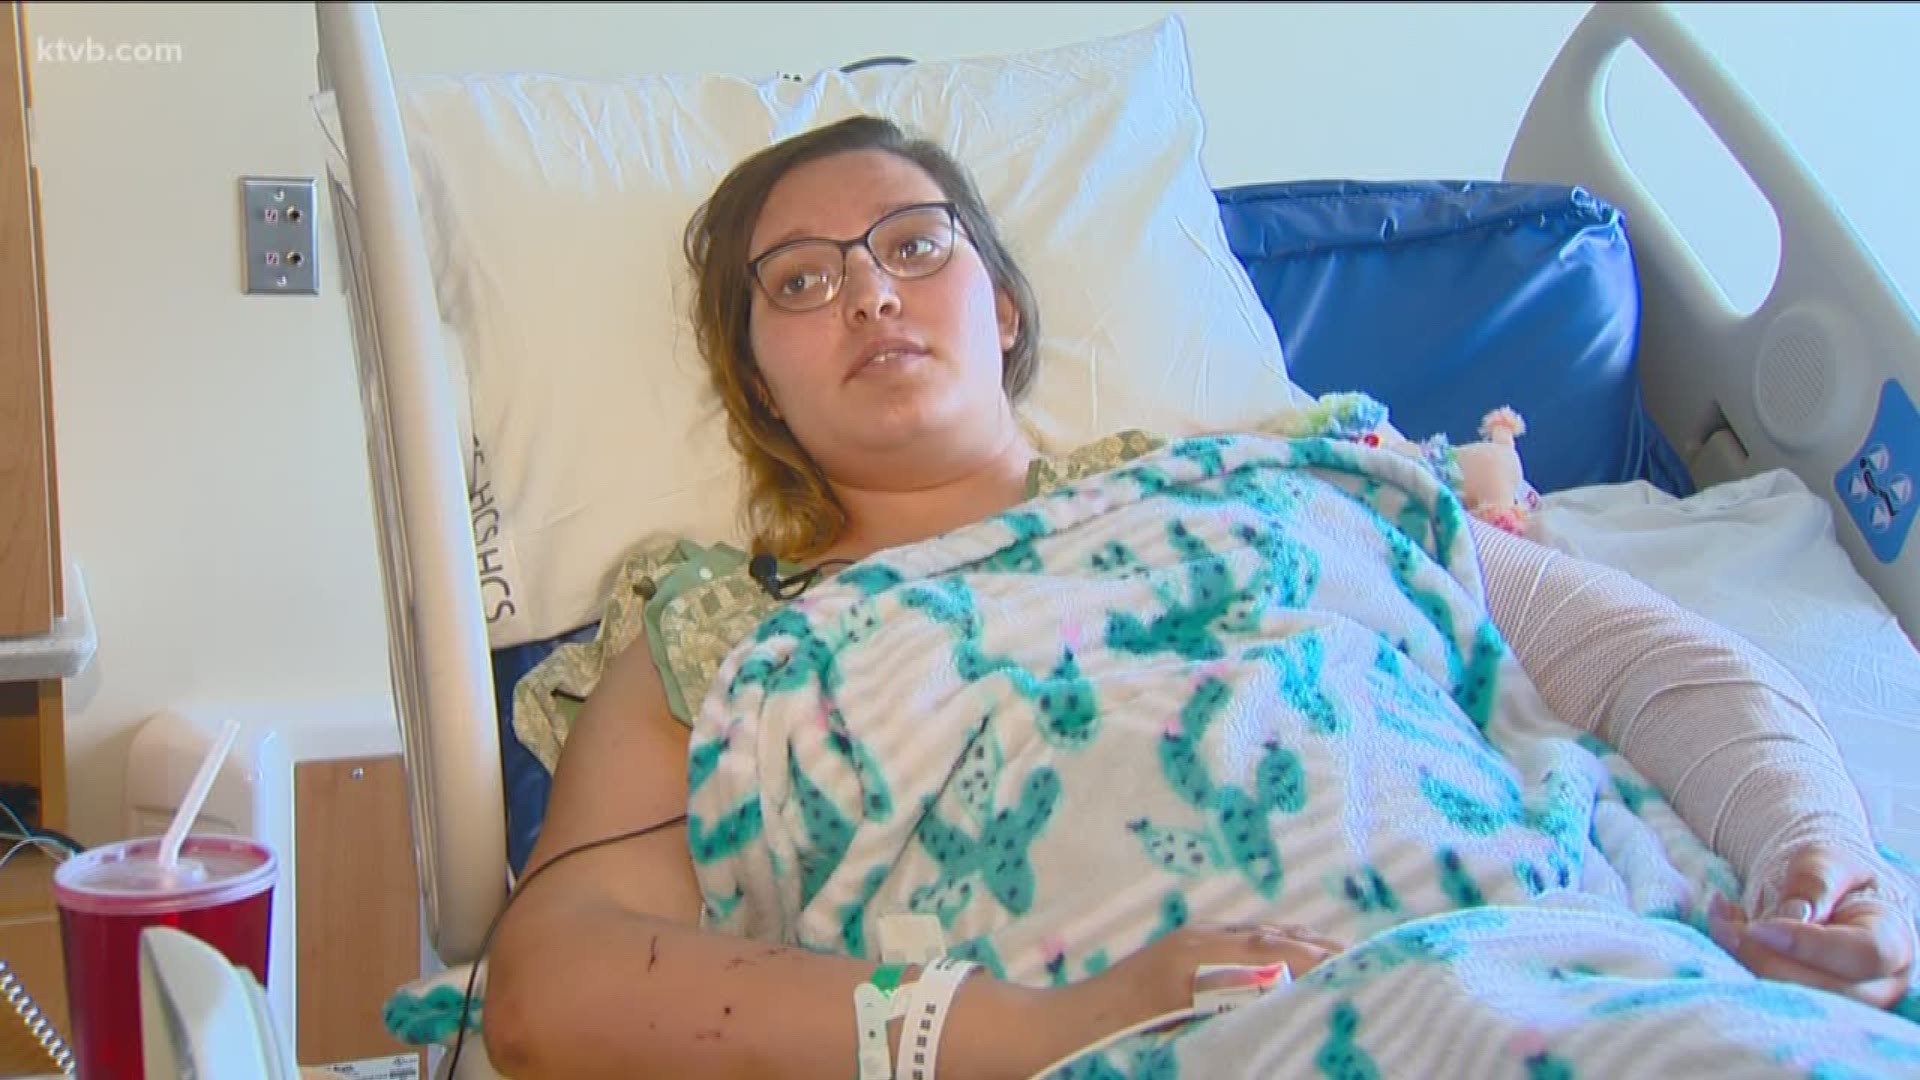 After Horrific Crash Local Woman Has A Long Road To Recovery